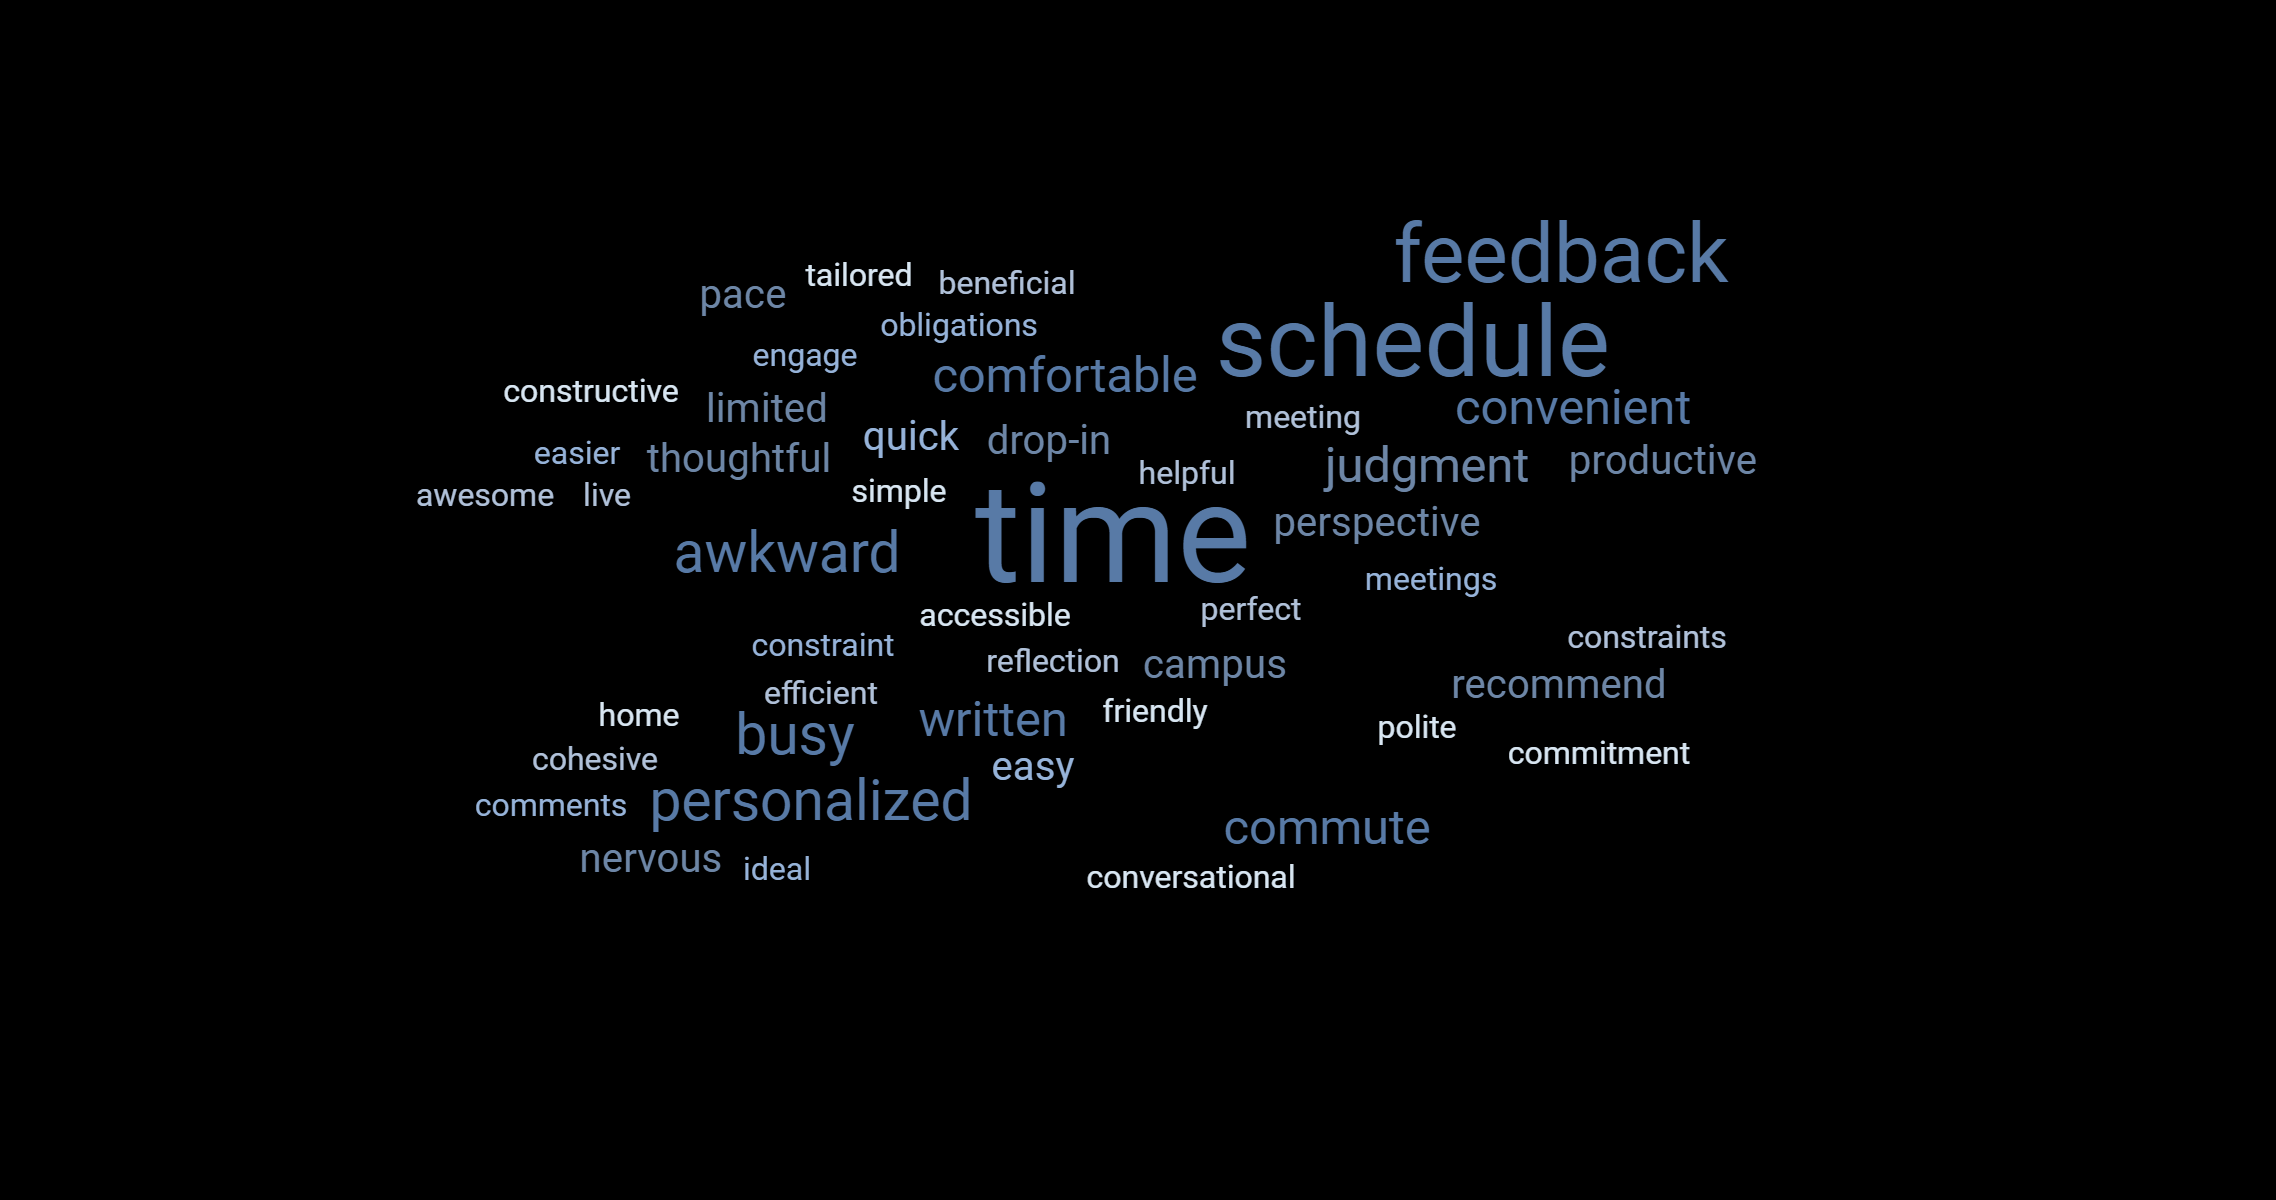 A word cloud composed using data from open-ended fields in Written Feedback writers' survey responses. The most prominent words in the cloud are: time, schedule, feedback, personalized, judgment, convenient, comfortable, awkward, busy, commute, and productive.